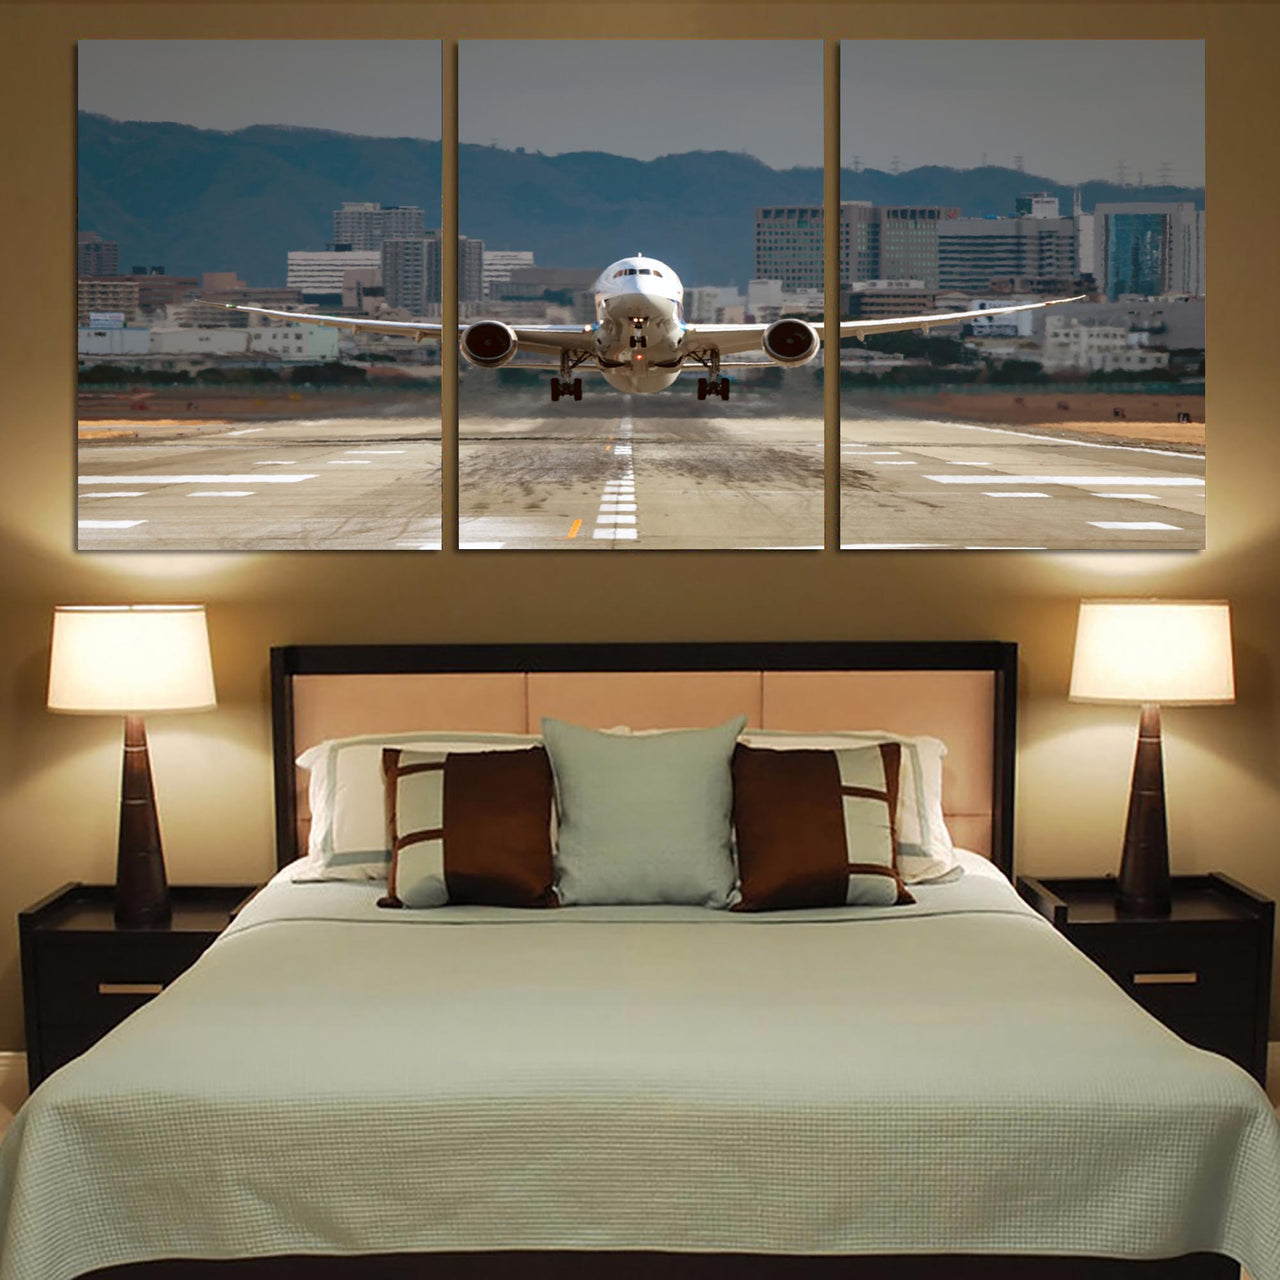 Departing Boeing 787 Dreamliner Printed Canvas Posters (3 Pieces)